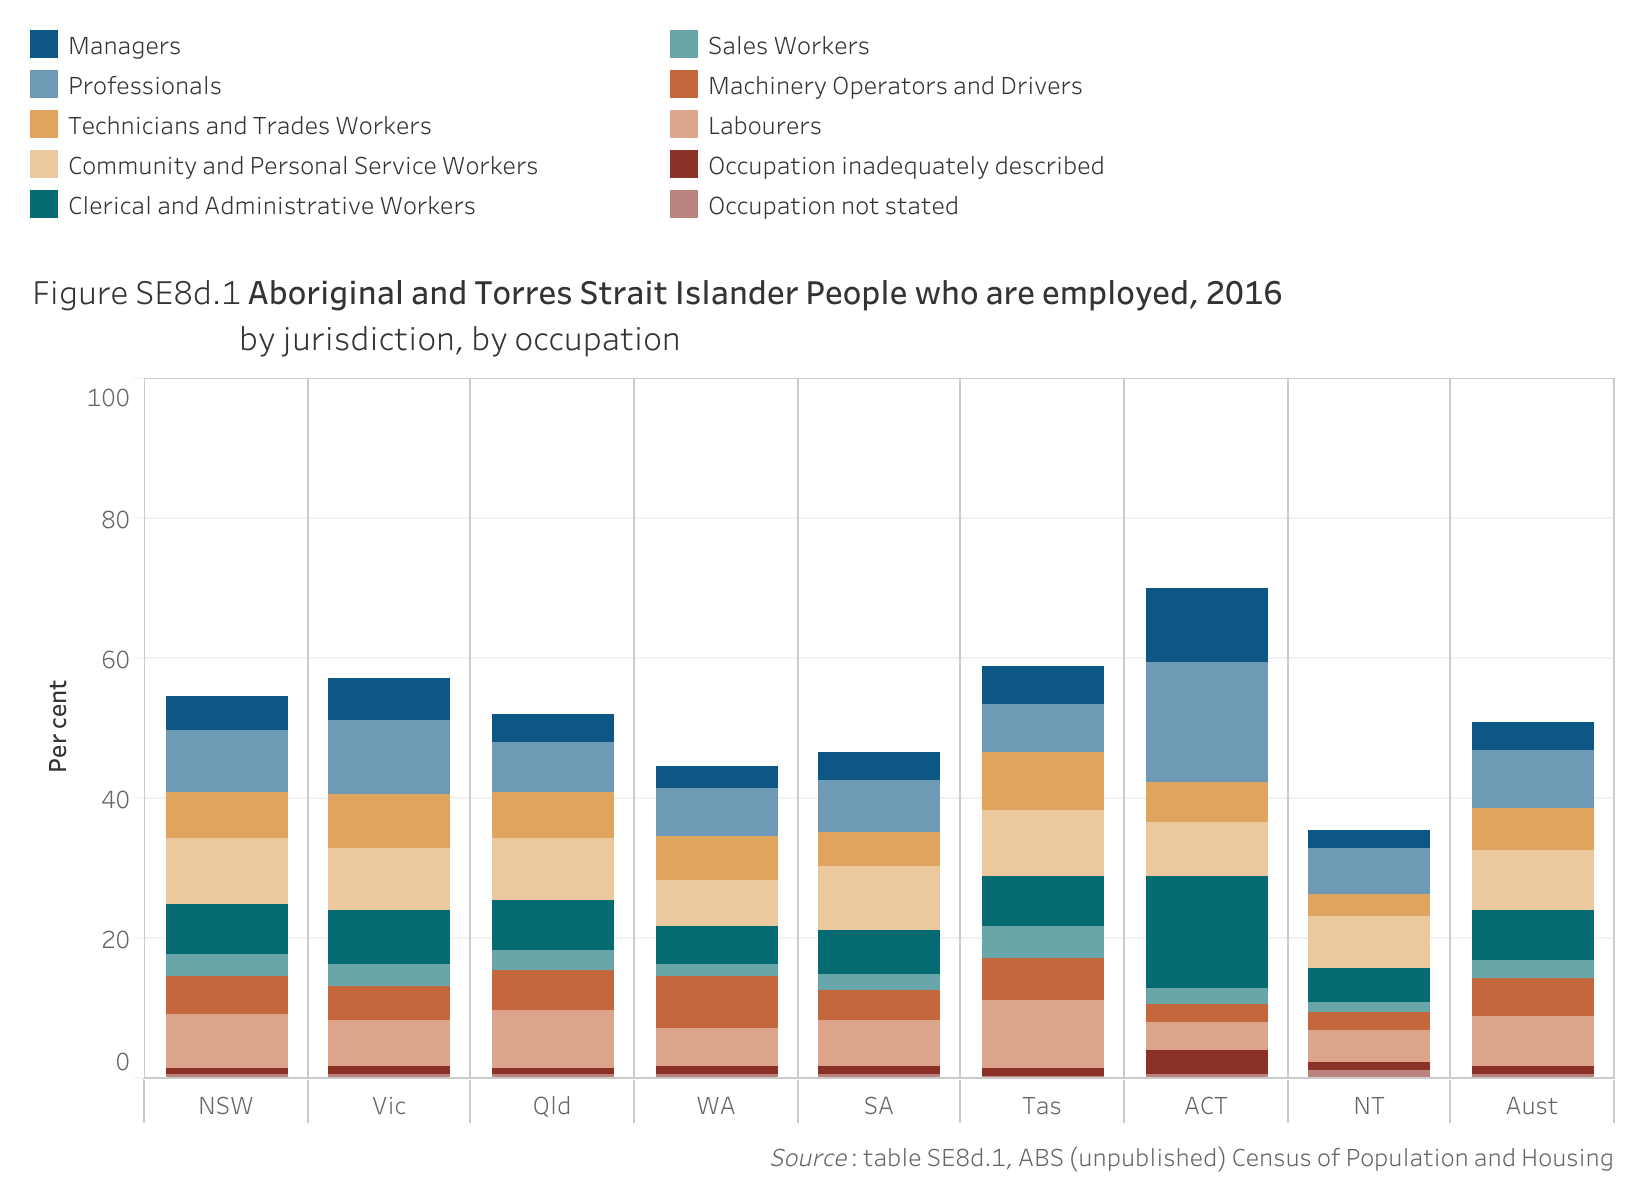 Figure SE8d.1. Stacked bar chart showing the proportion of Aboriginal and Torres Strait Islander people aged 25-64 years who are employed in 2016, by jurisdiction and by occupation. Data table of figure SE8d.1 is below.